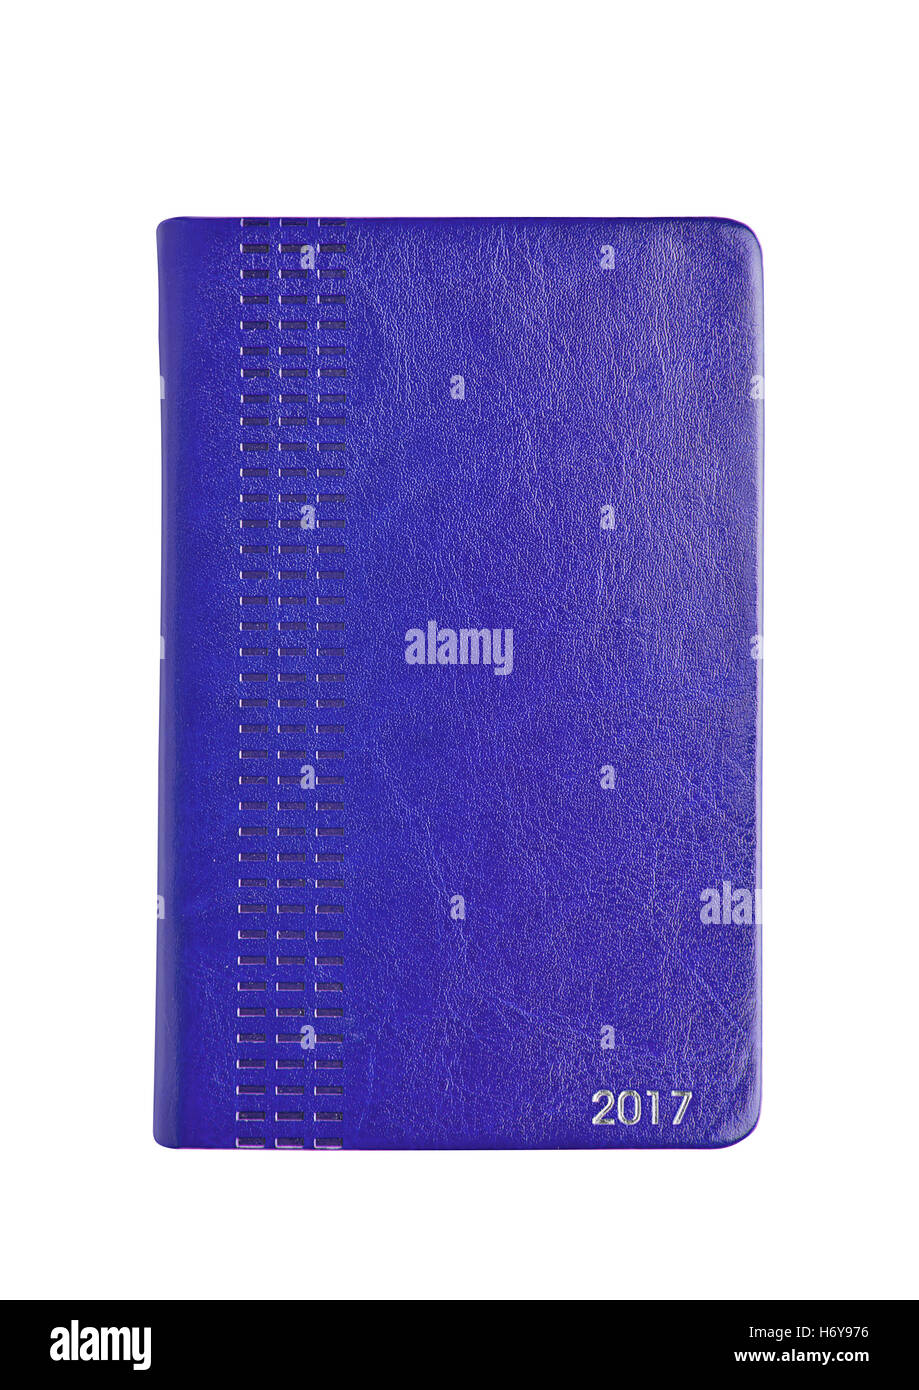 Blue leather 2017 diary note book on white background Stock Photo